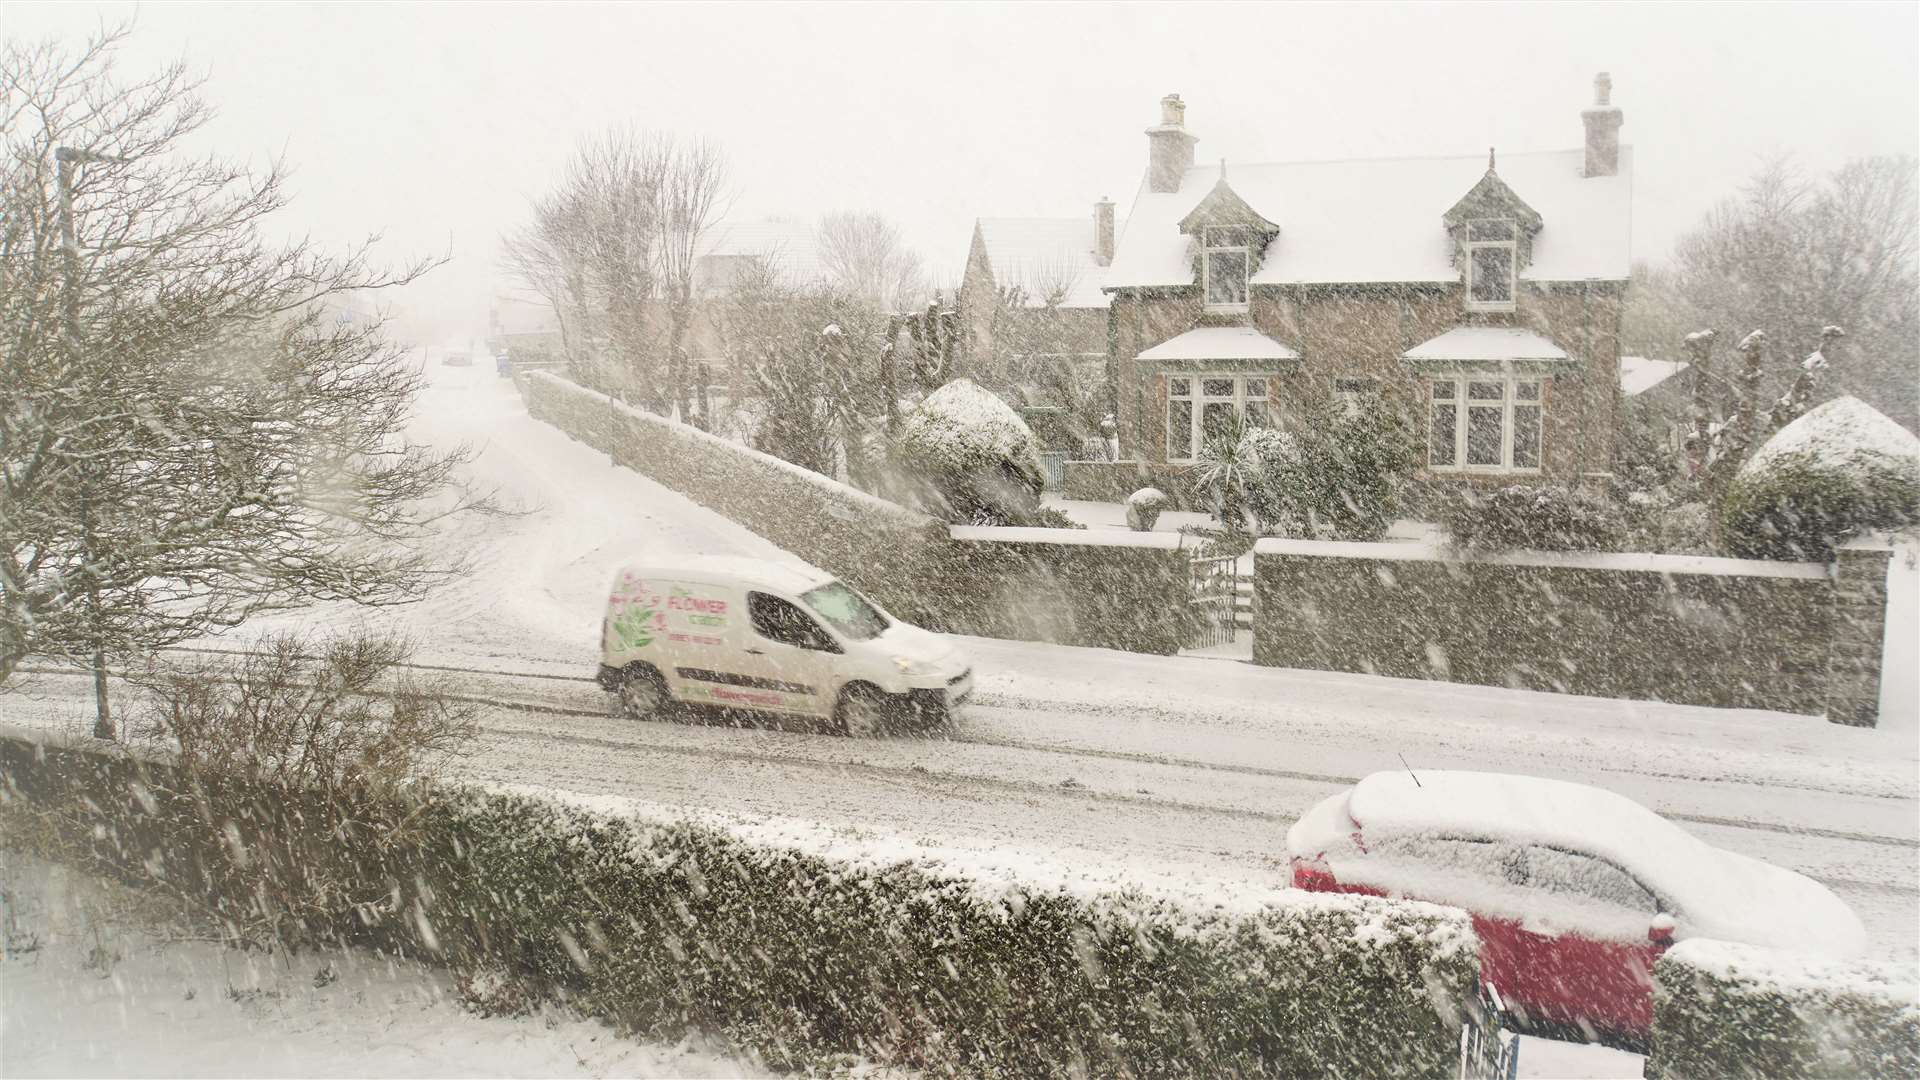 Snow falling in Wick this week. Picture: DGS